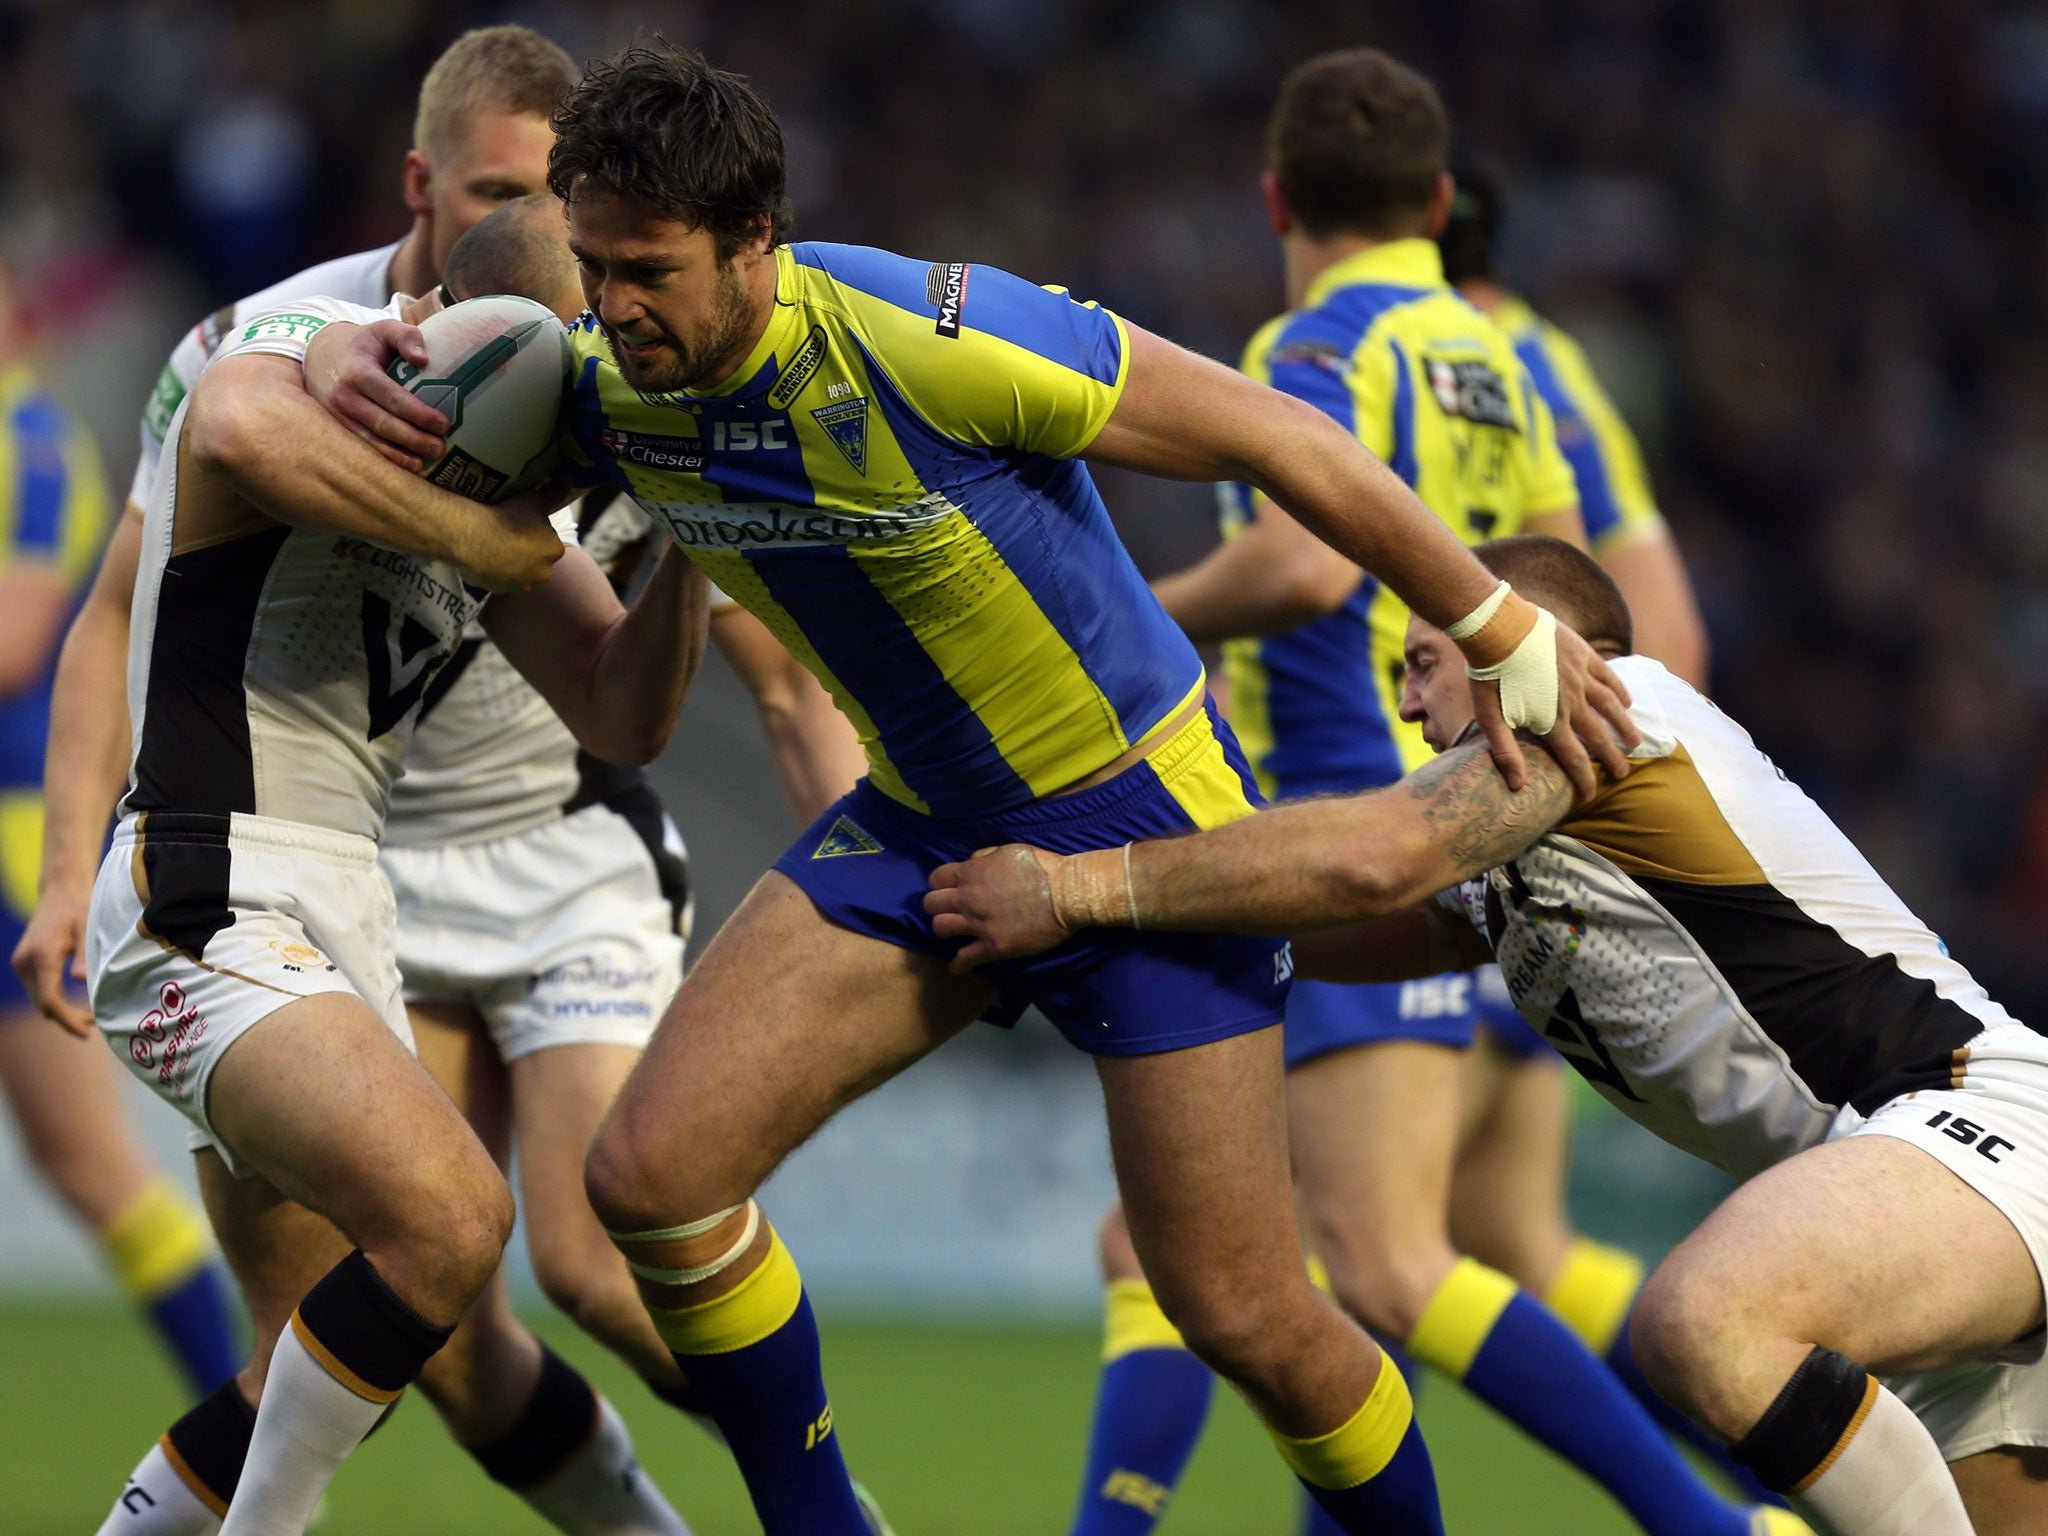 Aussie Trent Waterhouse led Warrington for the first time